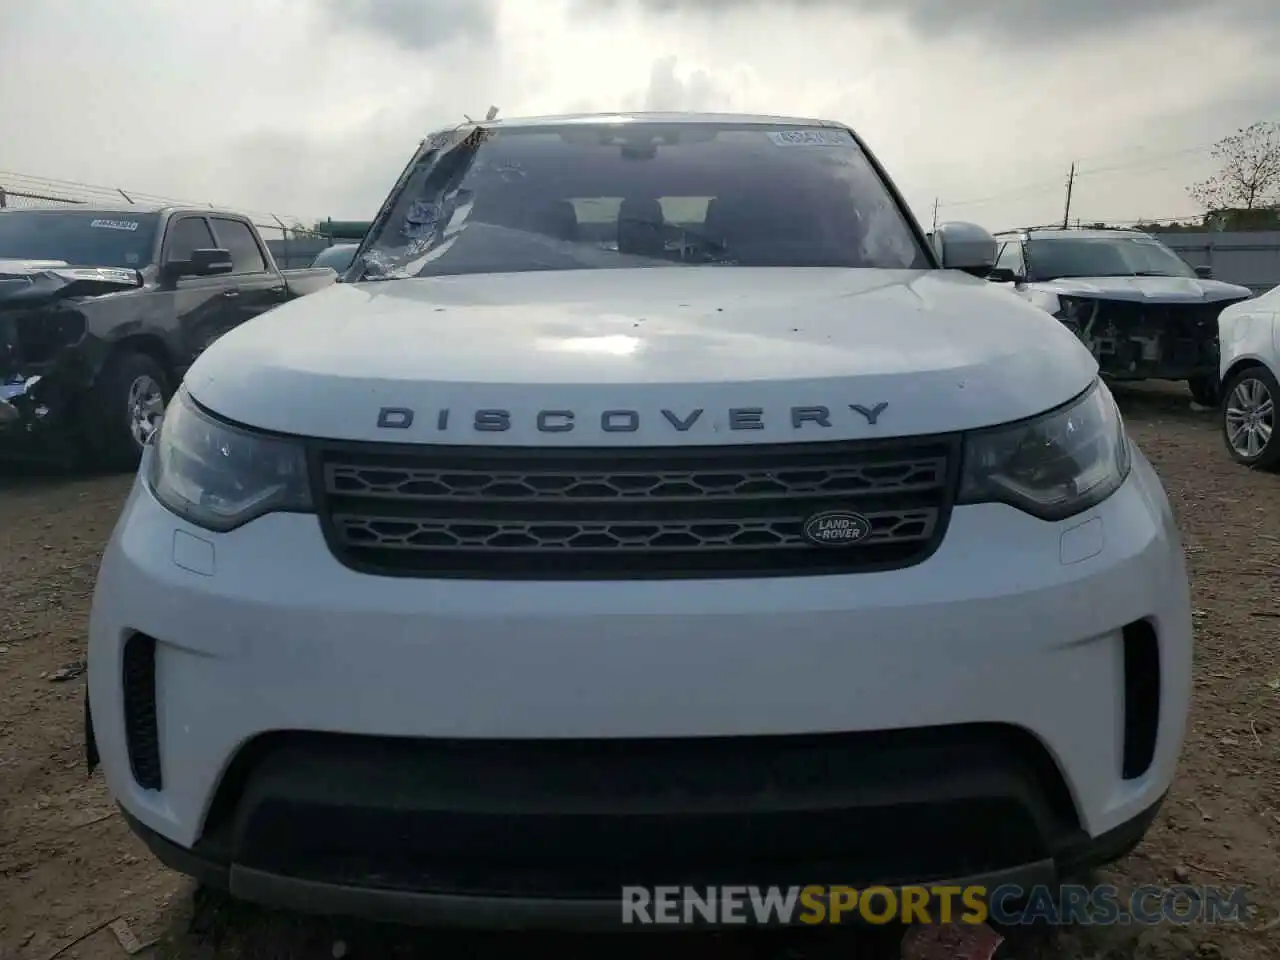 5 Photograph of a damaged car SALRG2RV0L2428116 LAND ROVER DISCOVERY 2020